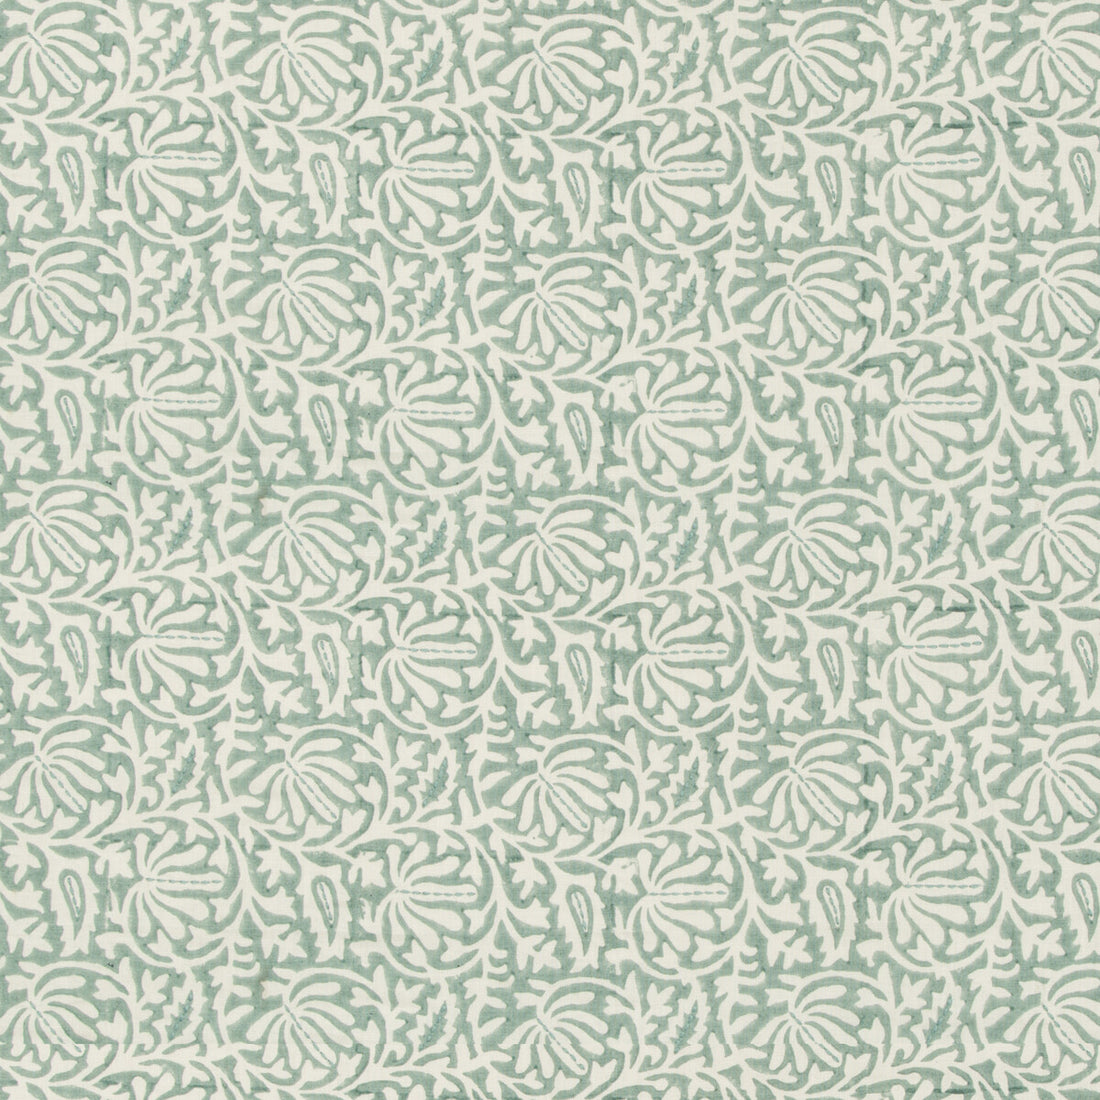 Laine Print fabric in pacific color - pattern 2017169.13.0 - by Lee Jofa in the Westport collection